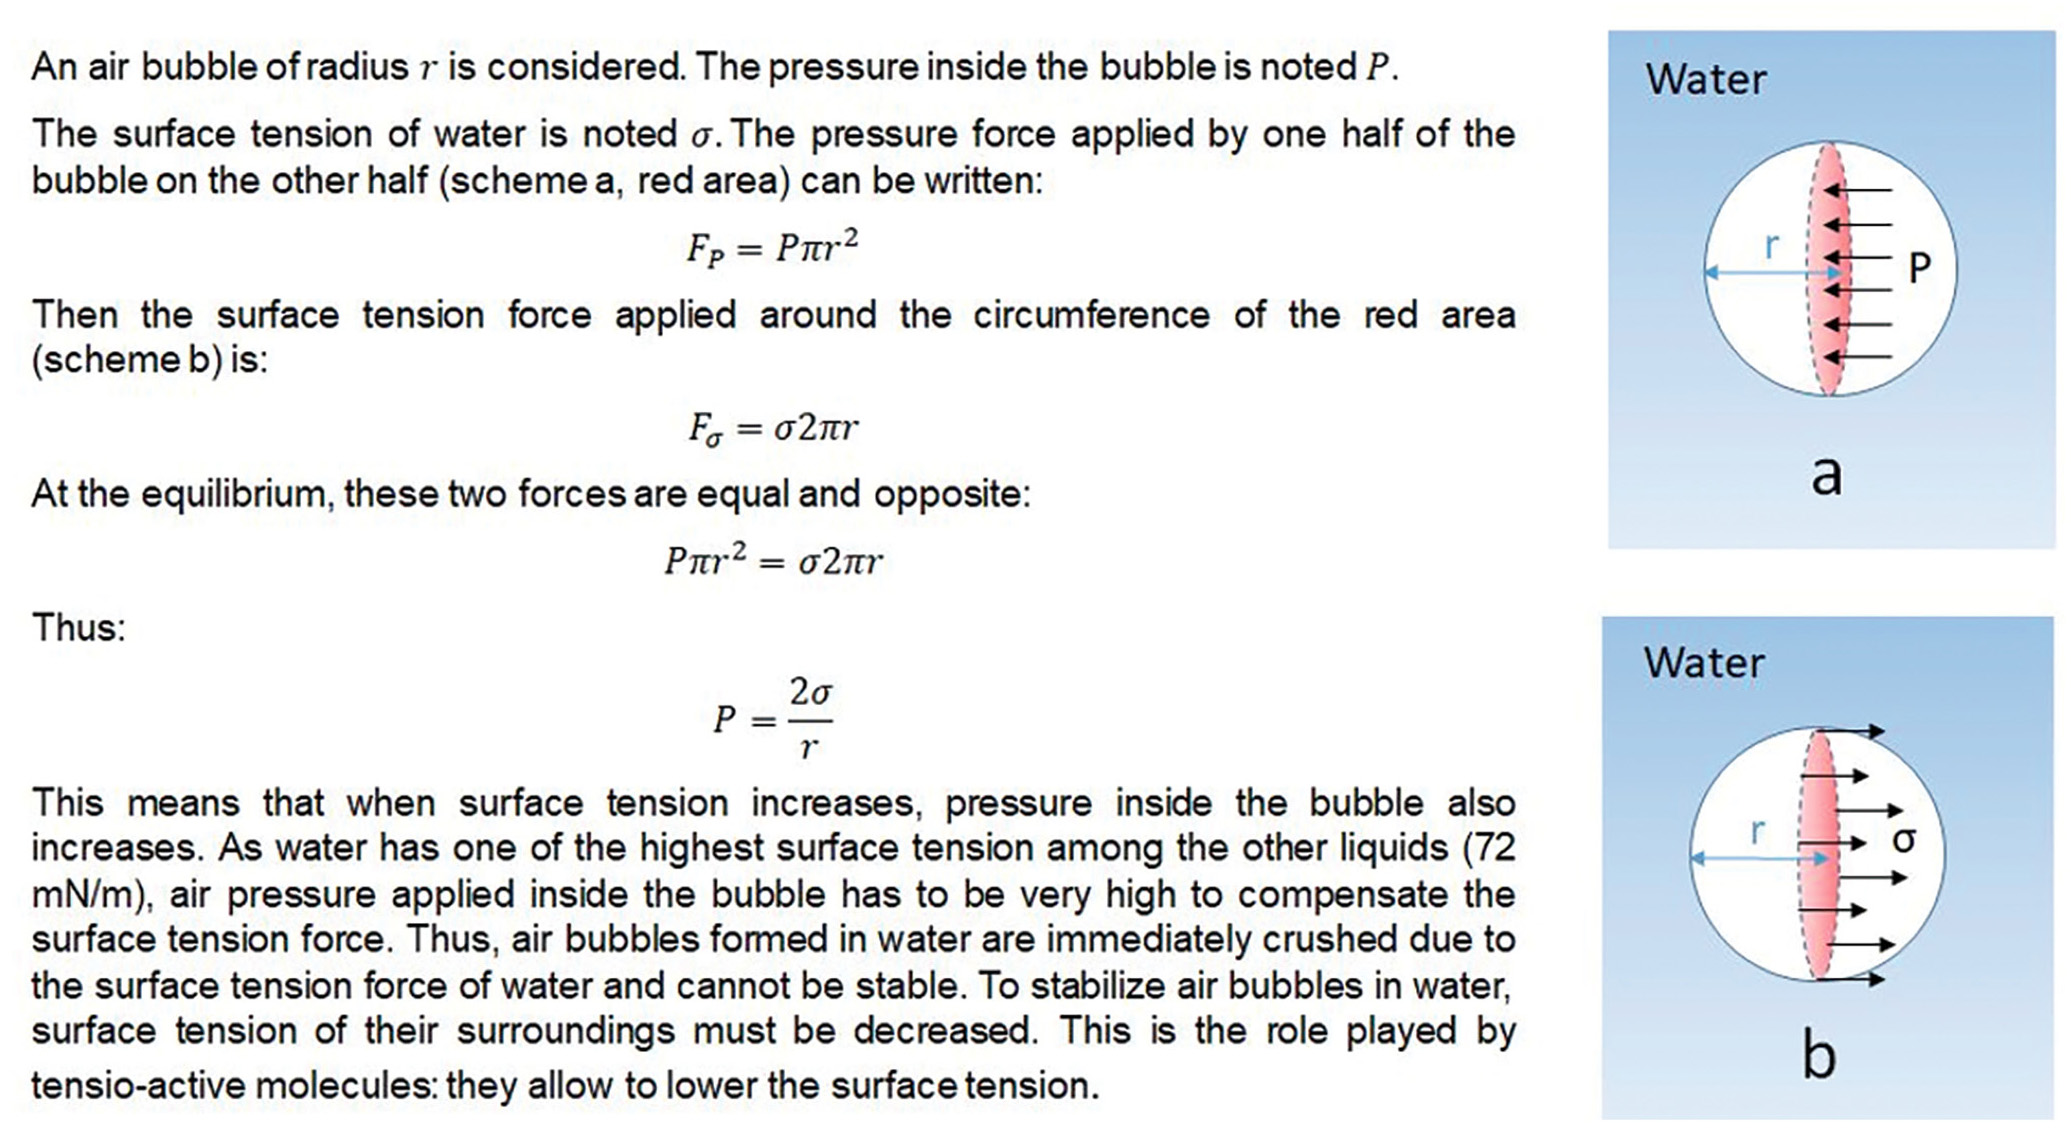 Scientific explanation and model taken for the study of pressure inside an air bubble of radius r in water: the pressure force (a) and the surface tension force (b) applied by one half of the bubble on the other half.